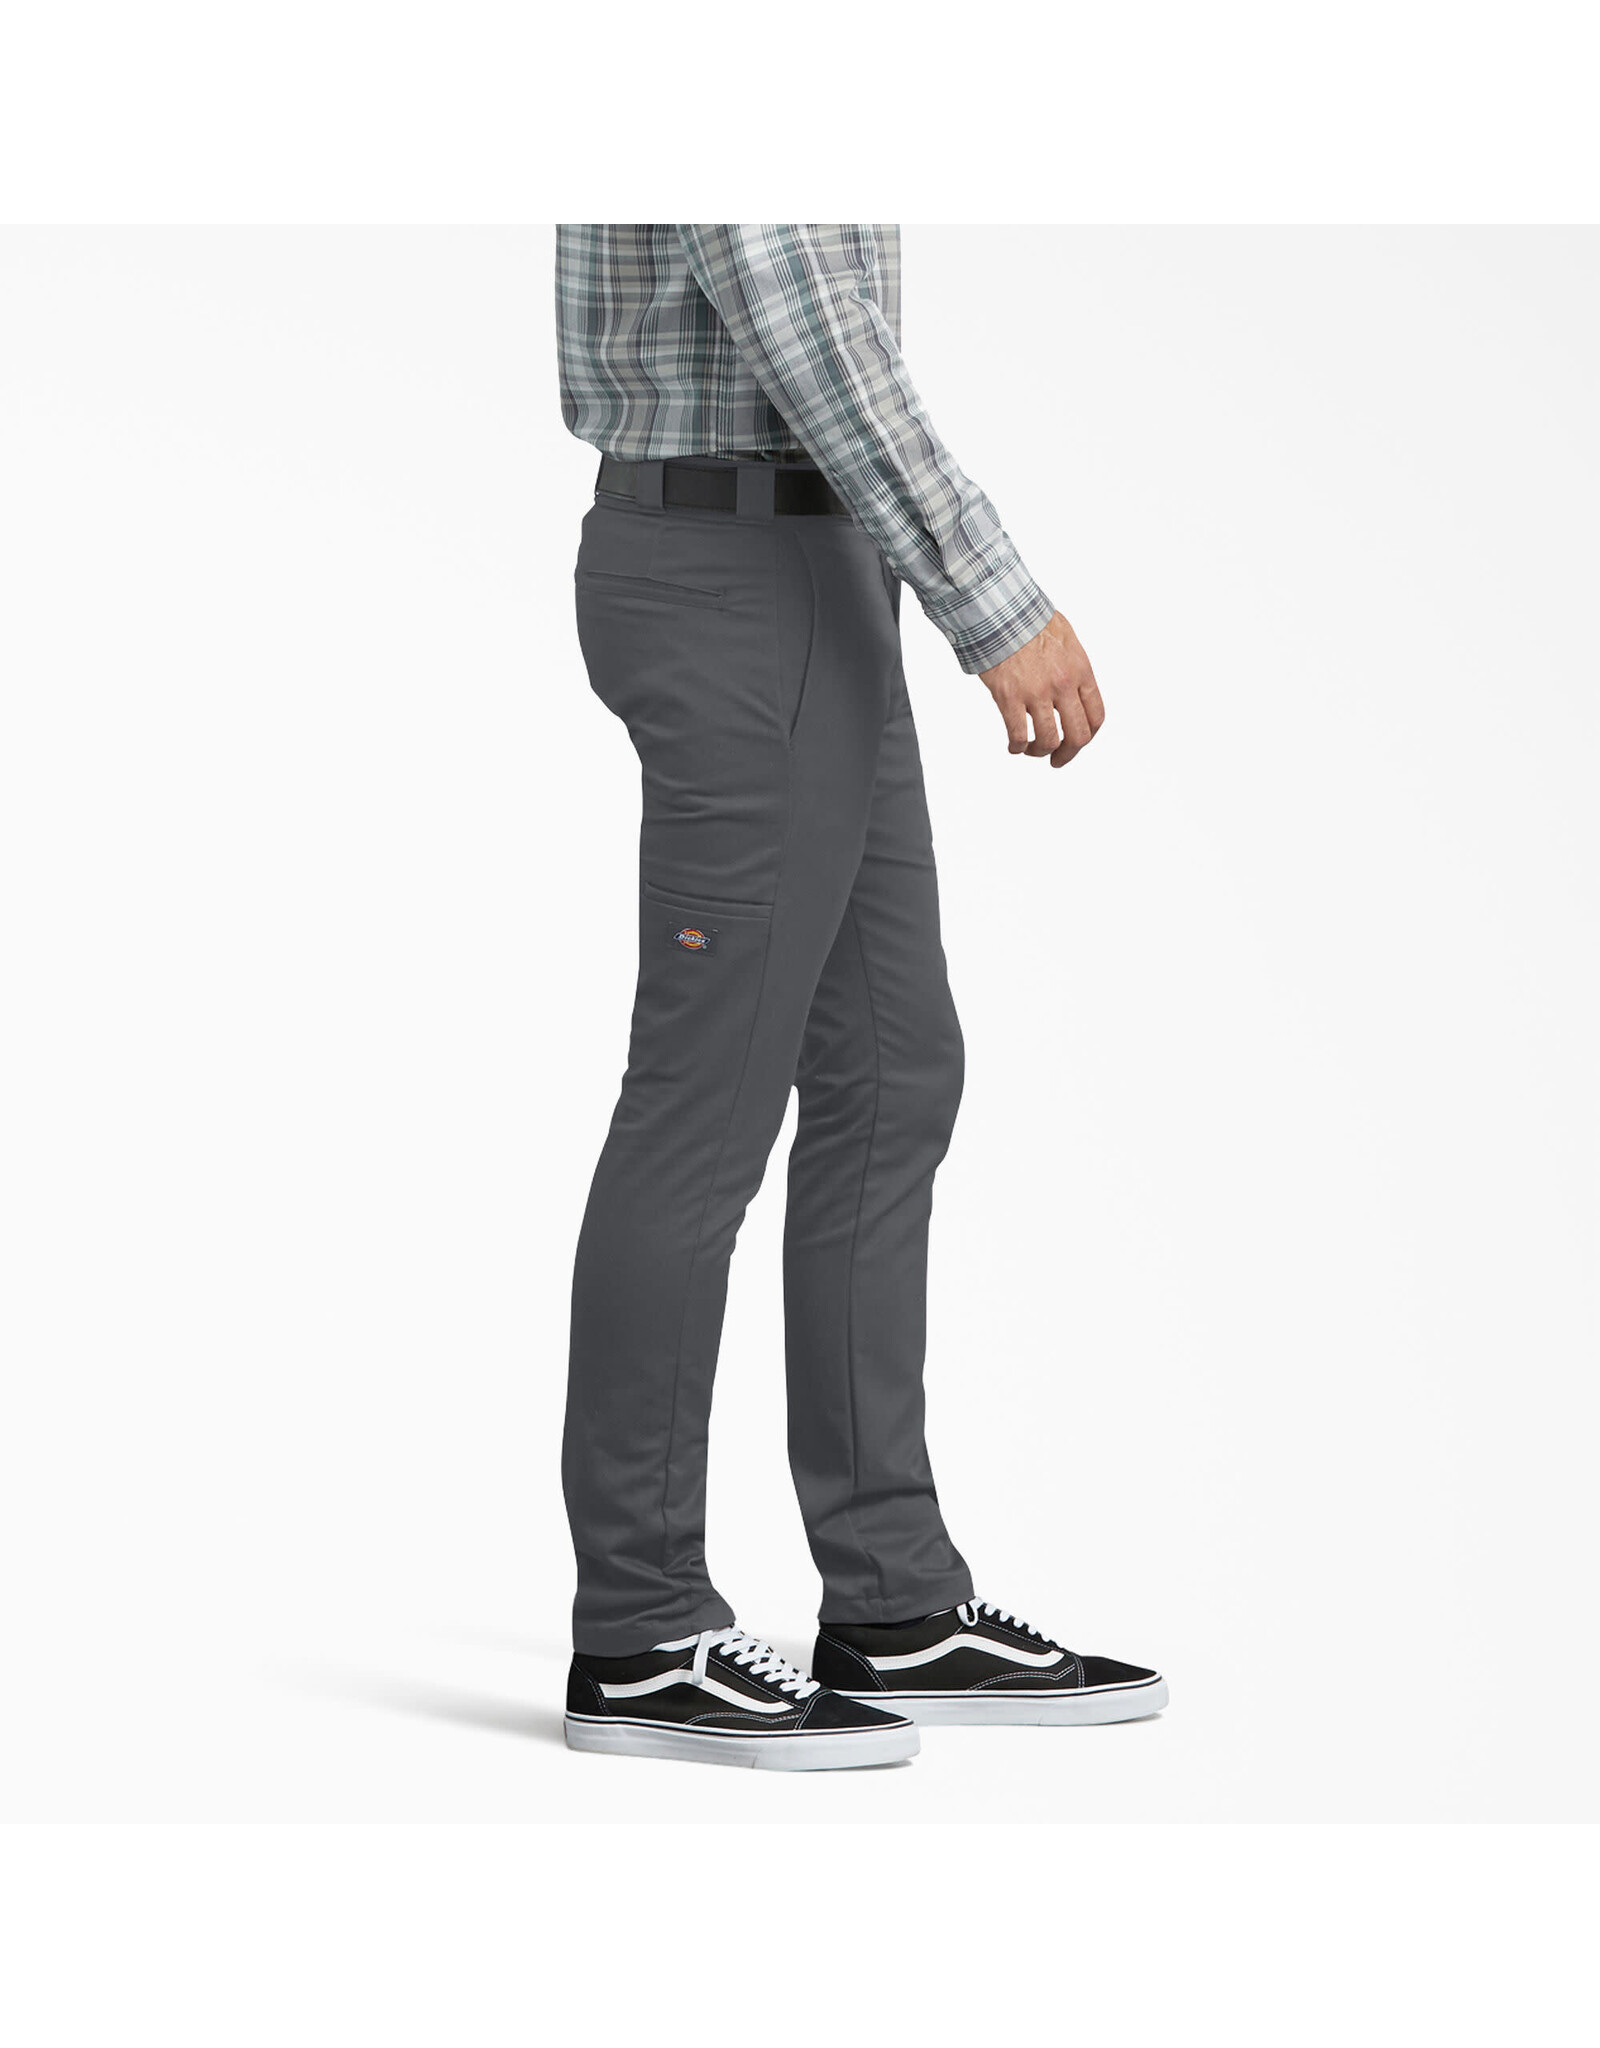 DICKIES Skinny Fit Work Pants Charcoal Gray - WP801CH